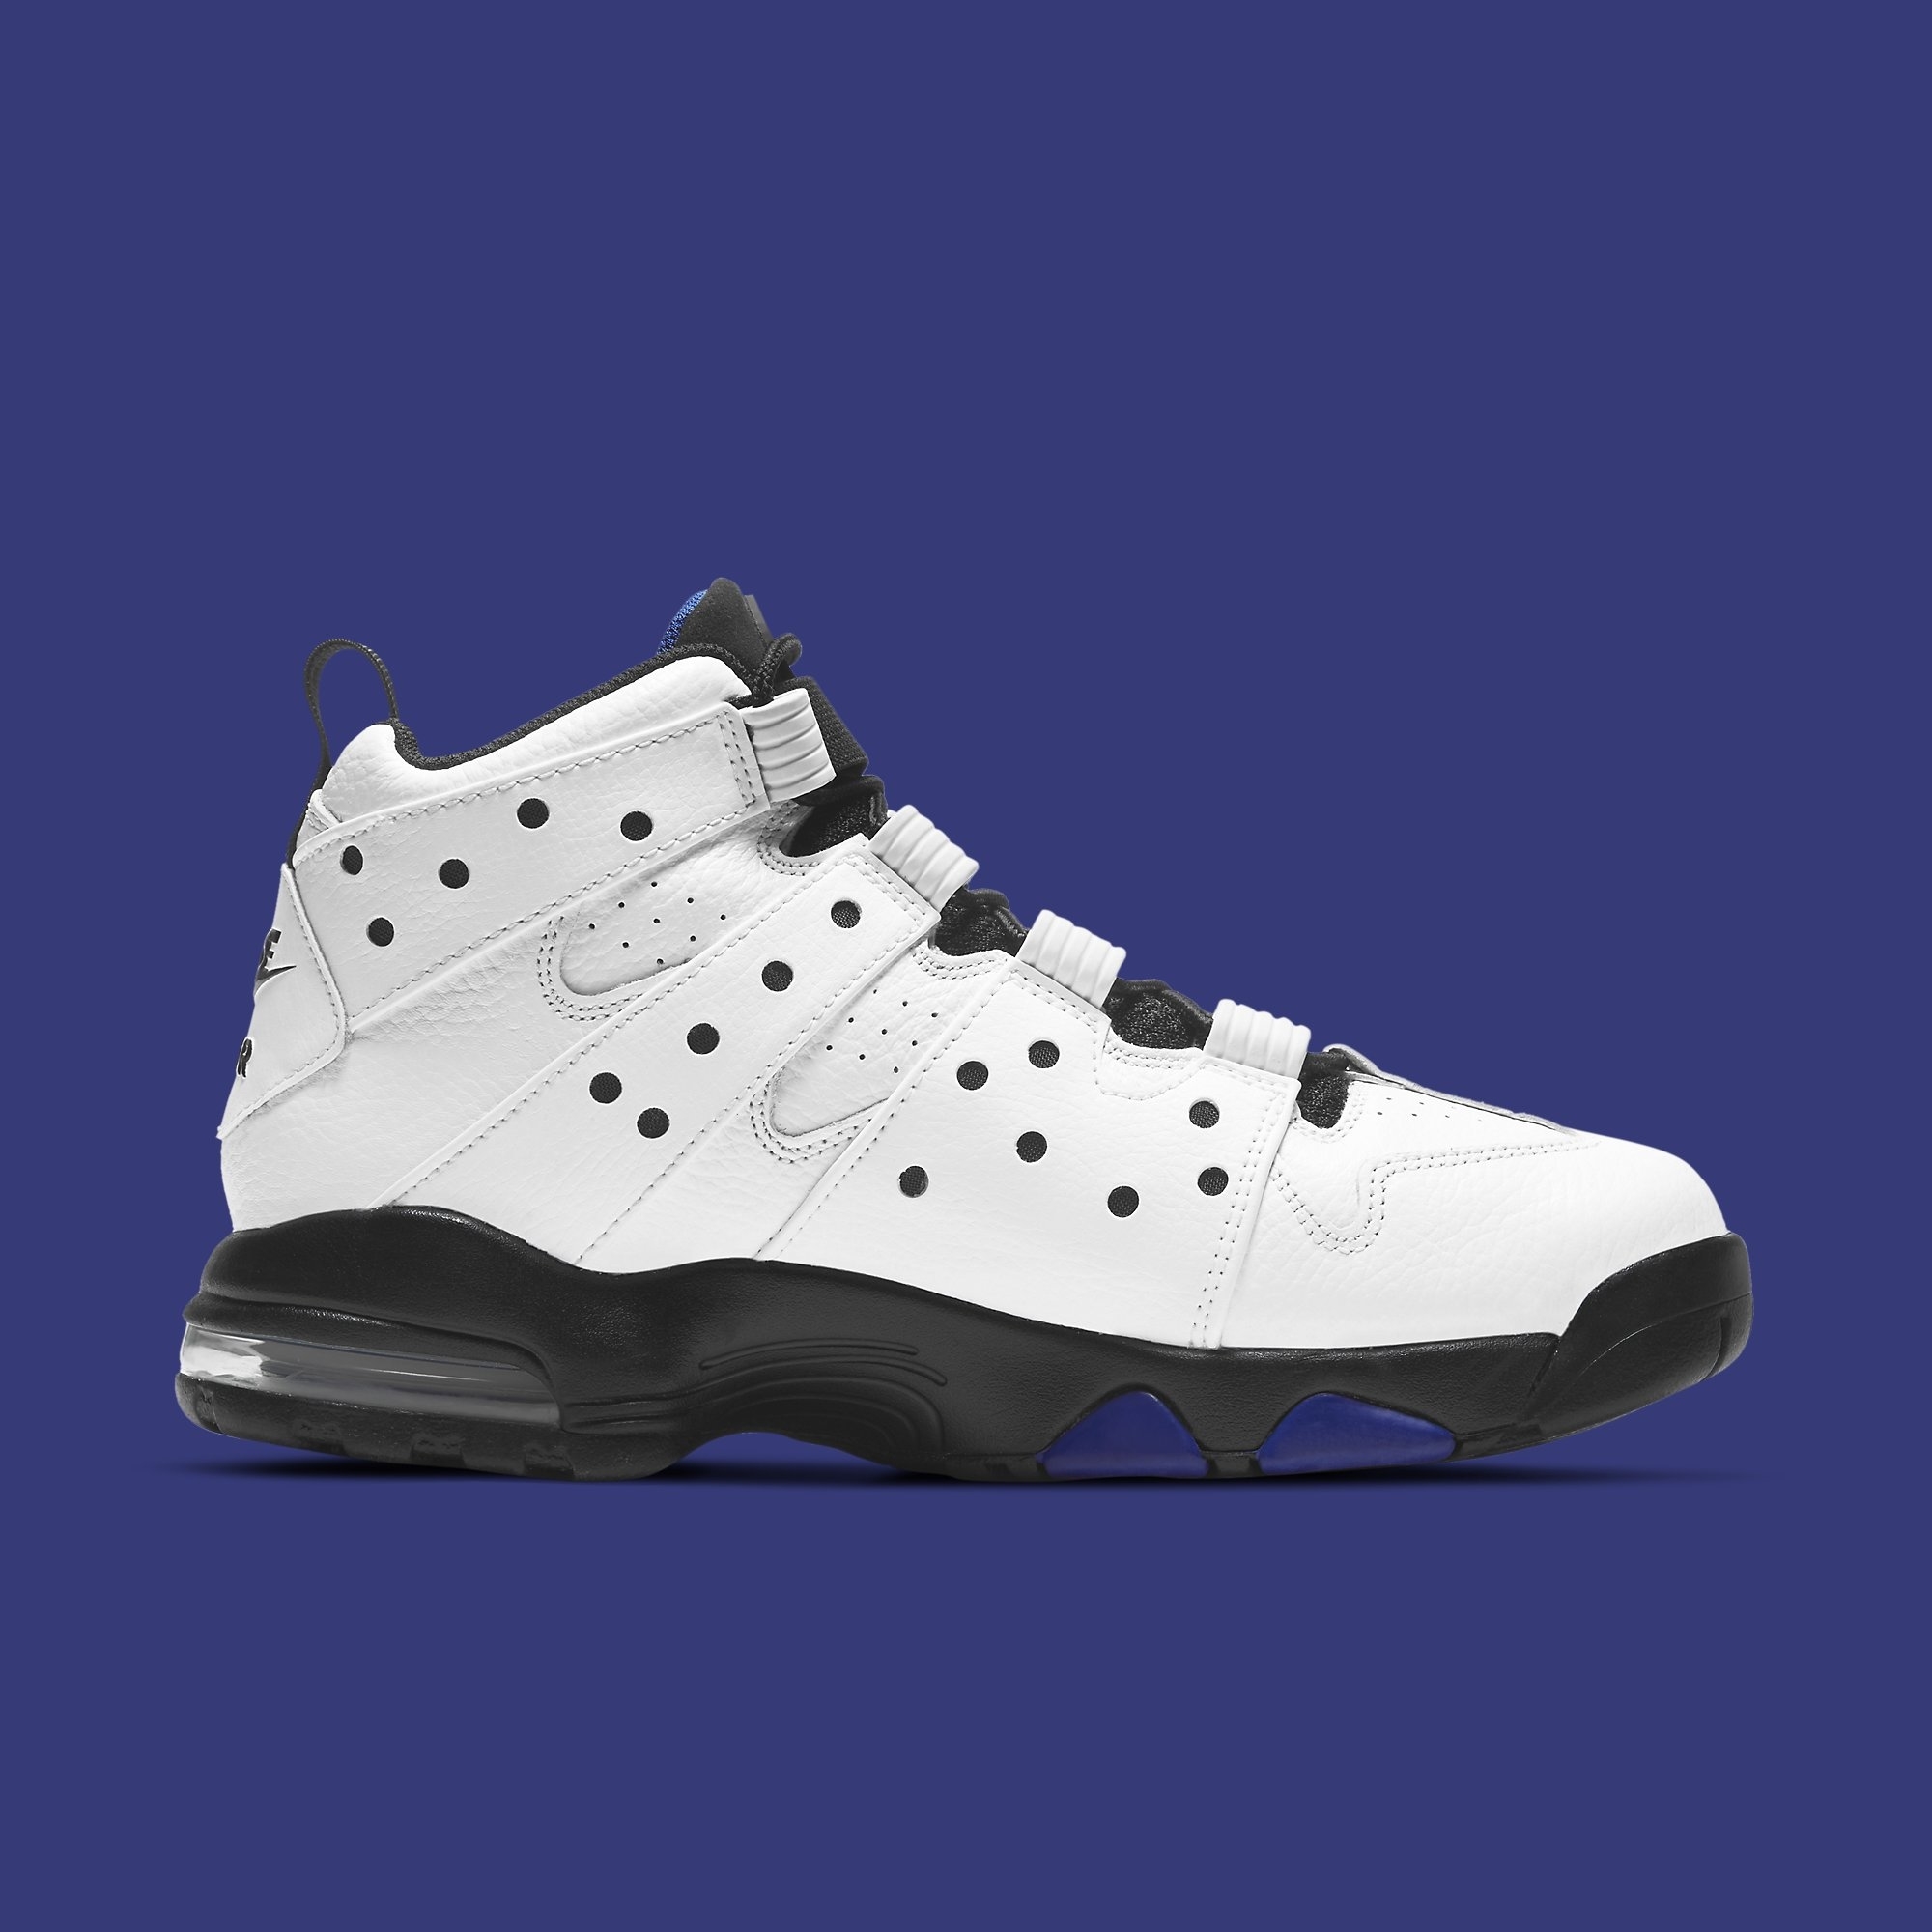 Nike Air Max2 CB 94 'Old Royal' DD8557-100 Release Date | Complex